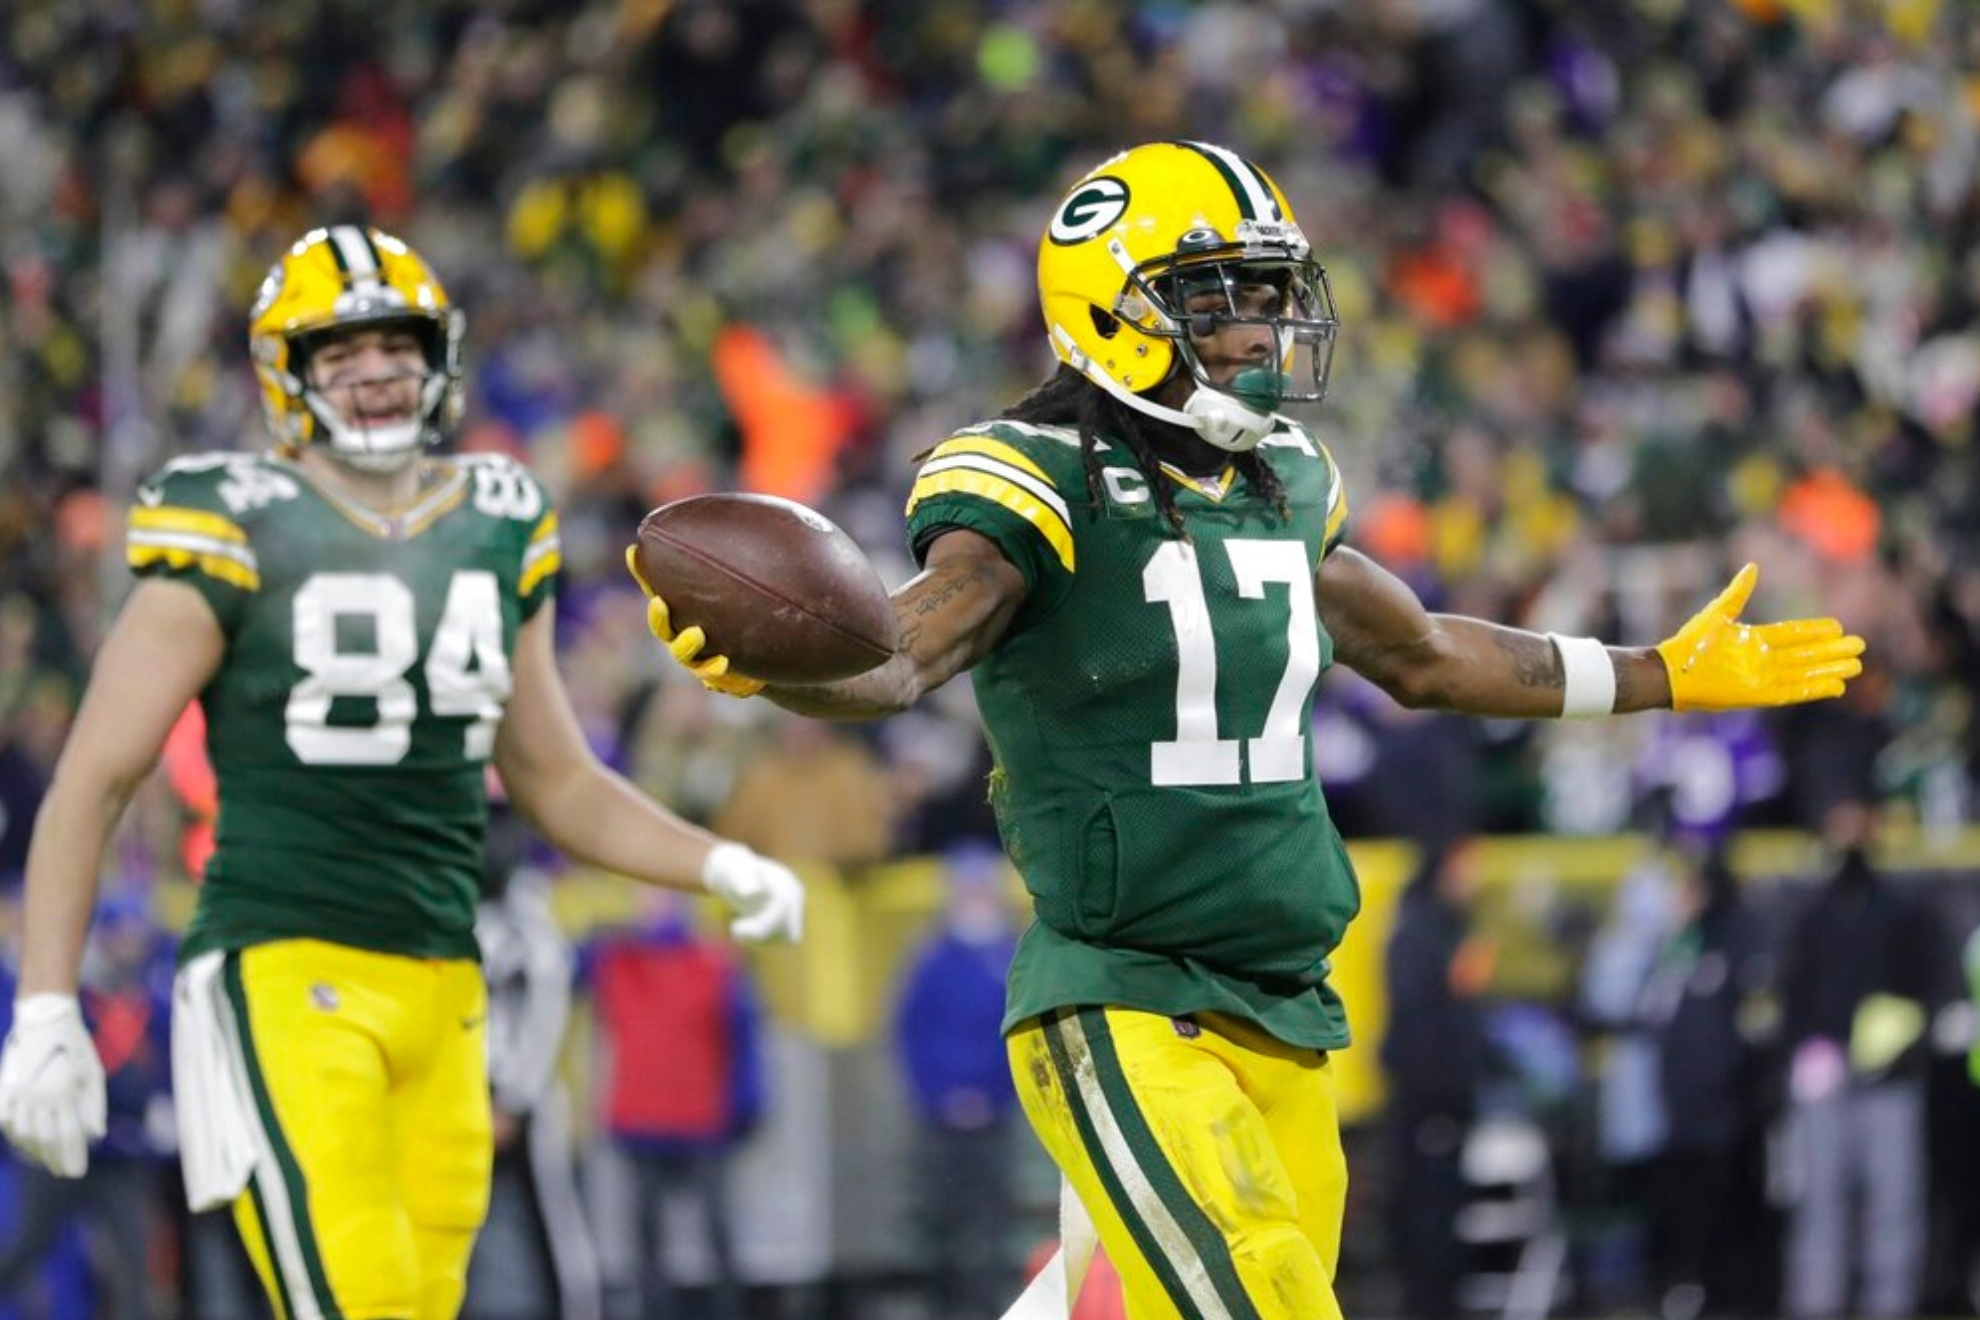 Adamas became one of the best receiver's in the NFL in his time with Green Bay